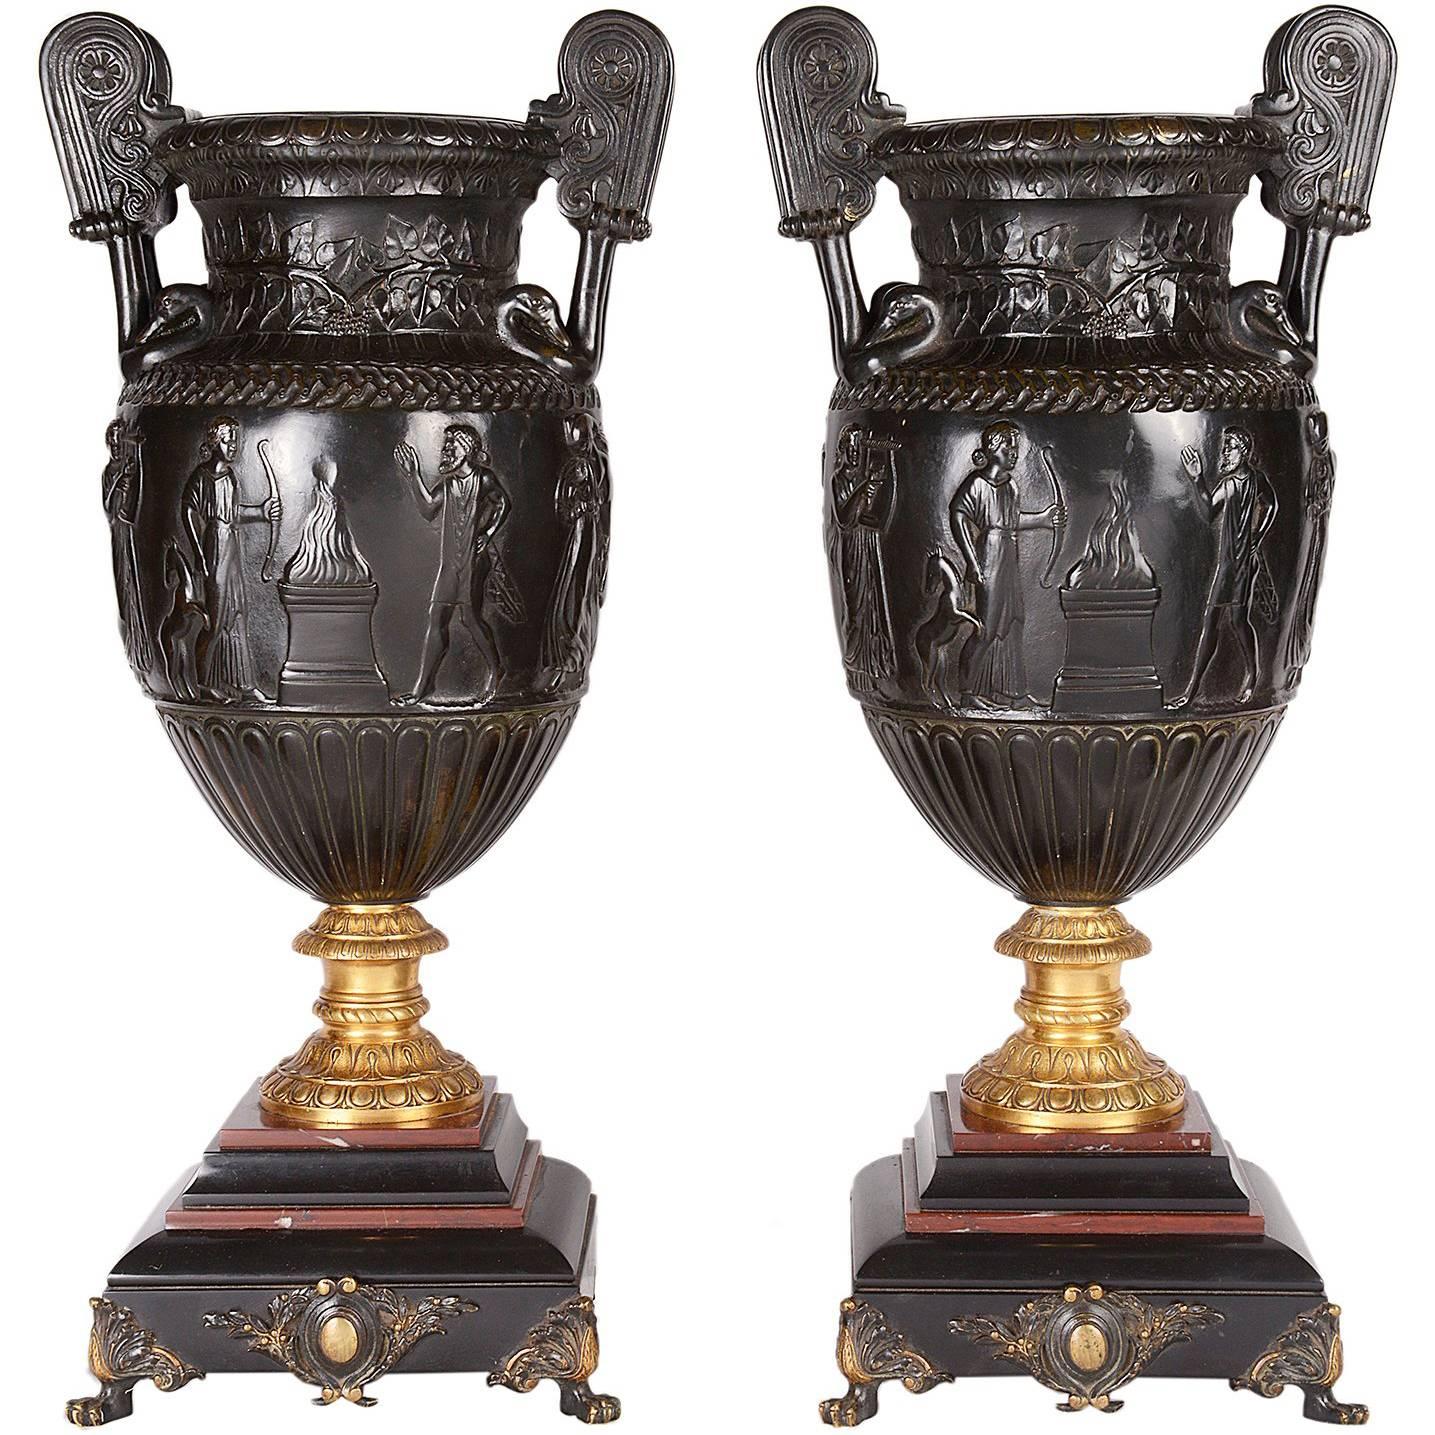 Large Pair of Neoclassical Bronze Urns, 19th Century